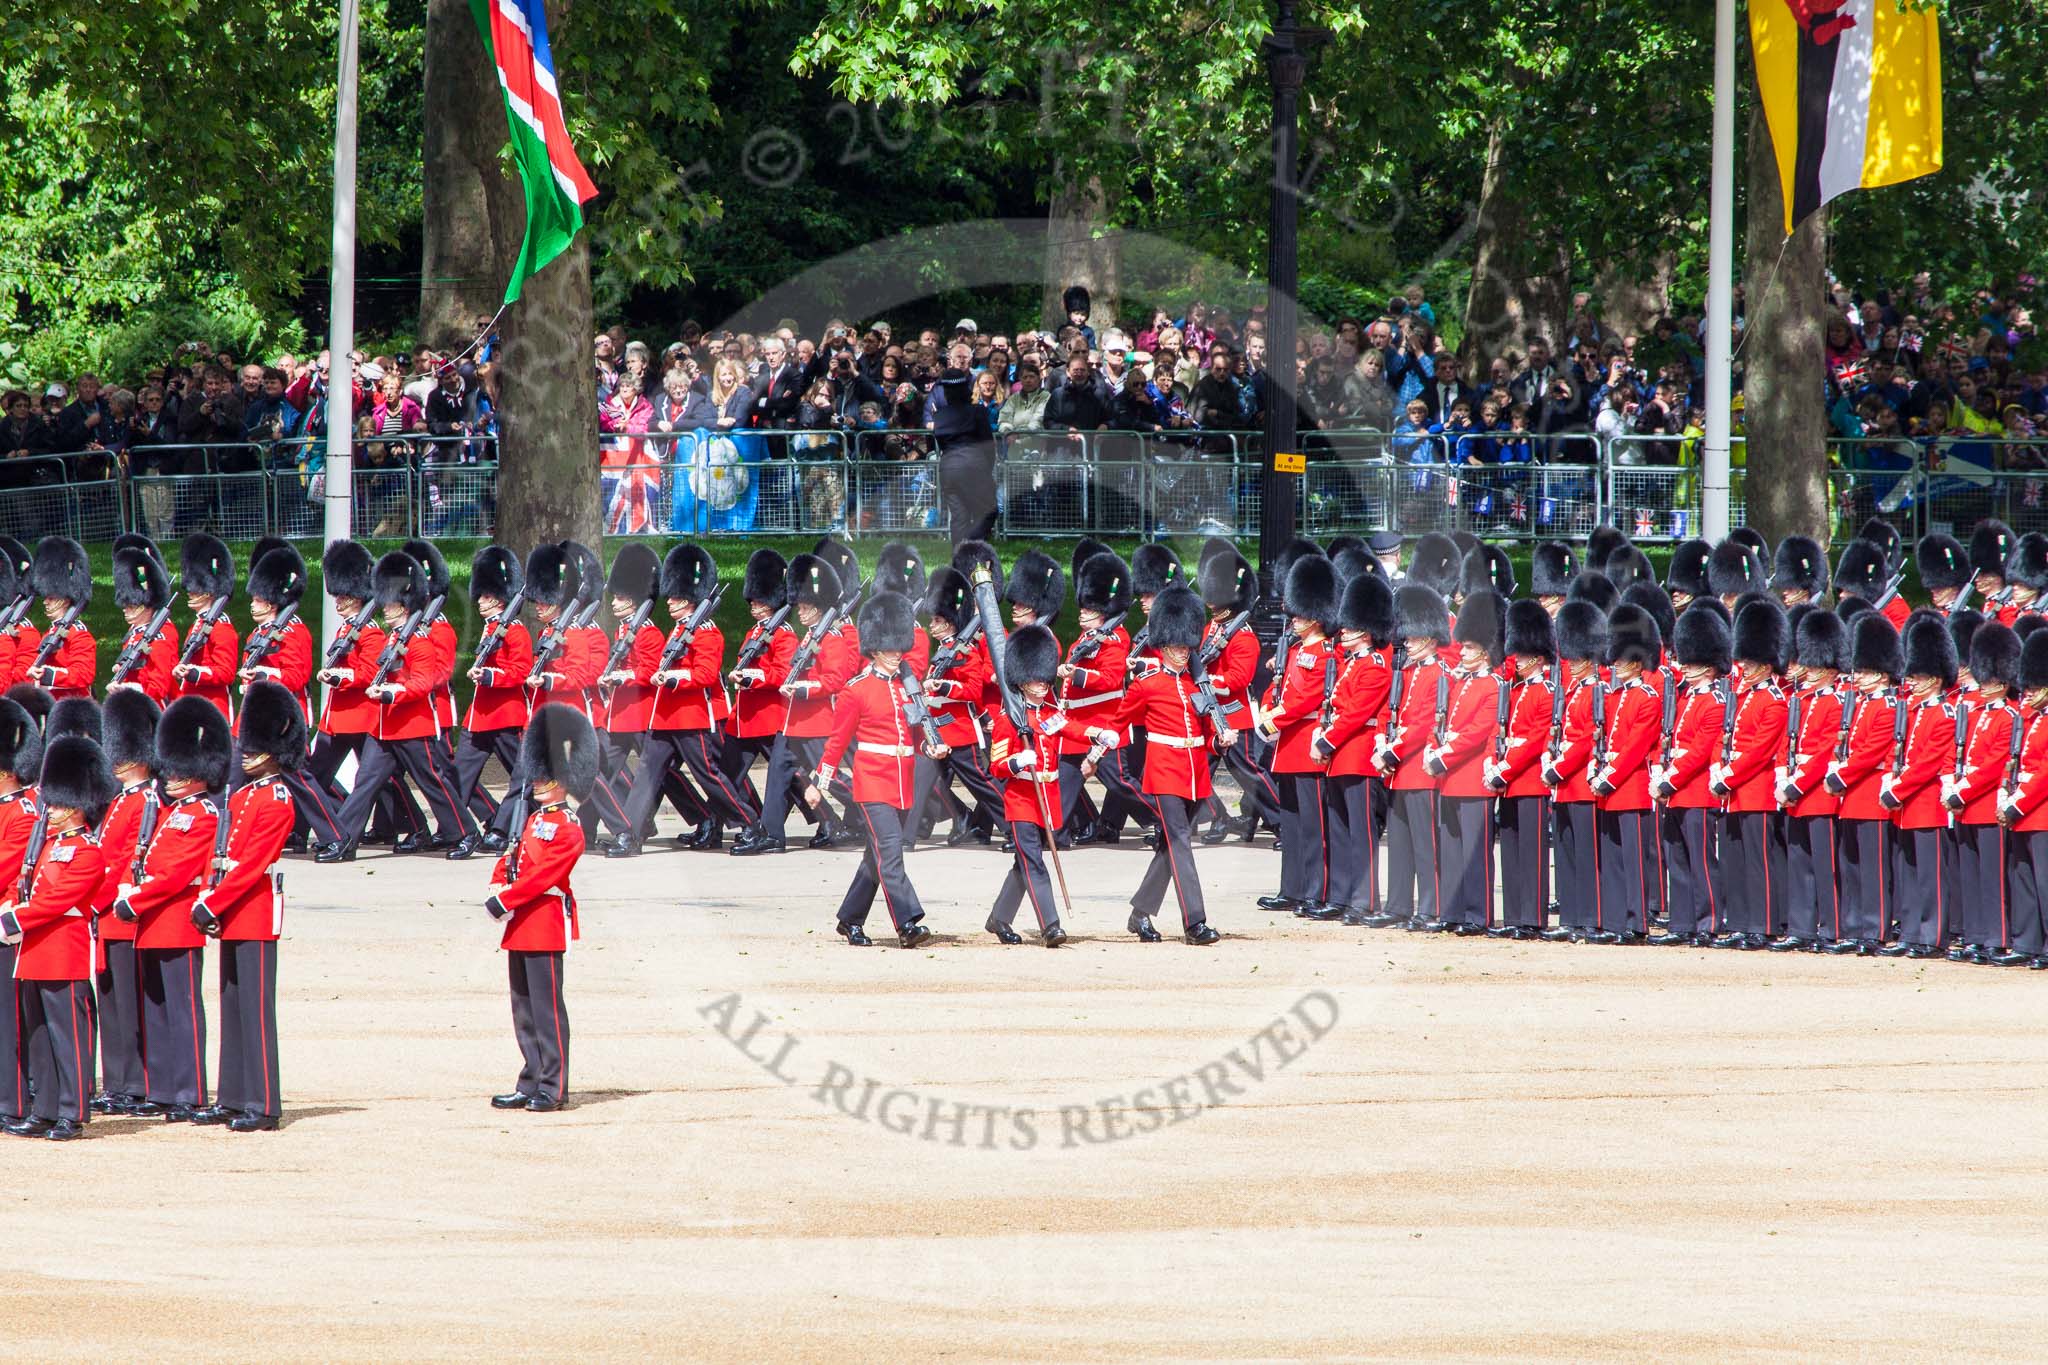 Trooping the Colour 2013: The Colour Party breaks away from No. 1 Guard - Colour Sergeant R J Heath, carrying the Colour and two sentries marching to their position on Horse Guards Parade. Image #106, 15 June 2013 10:30 Horse Guards Parade, London, UK